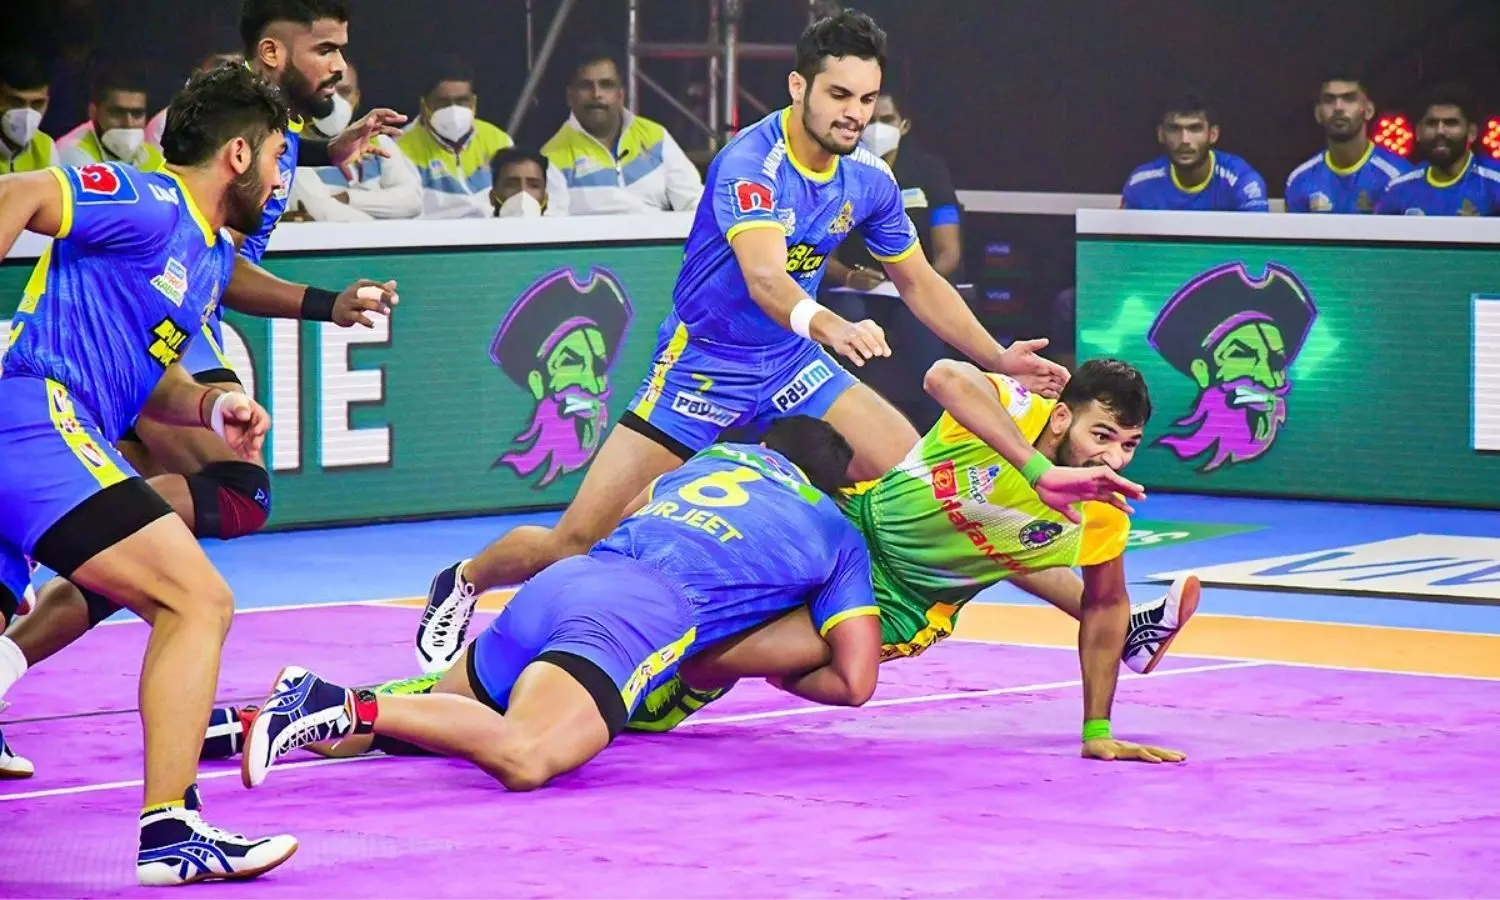 Tamil Thalaivas and Patna Pirates clash in highly-anticipated contest